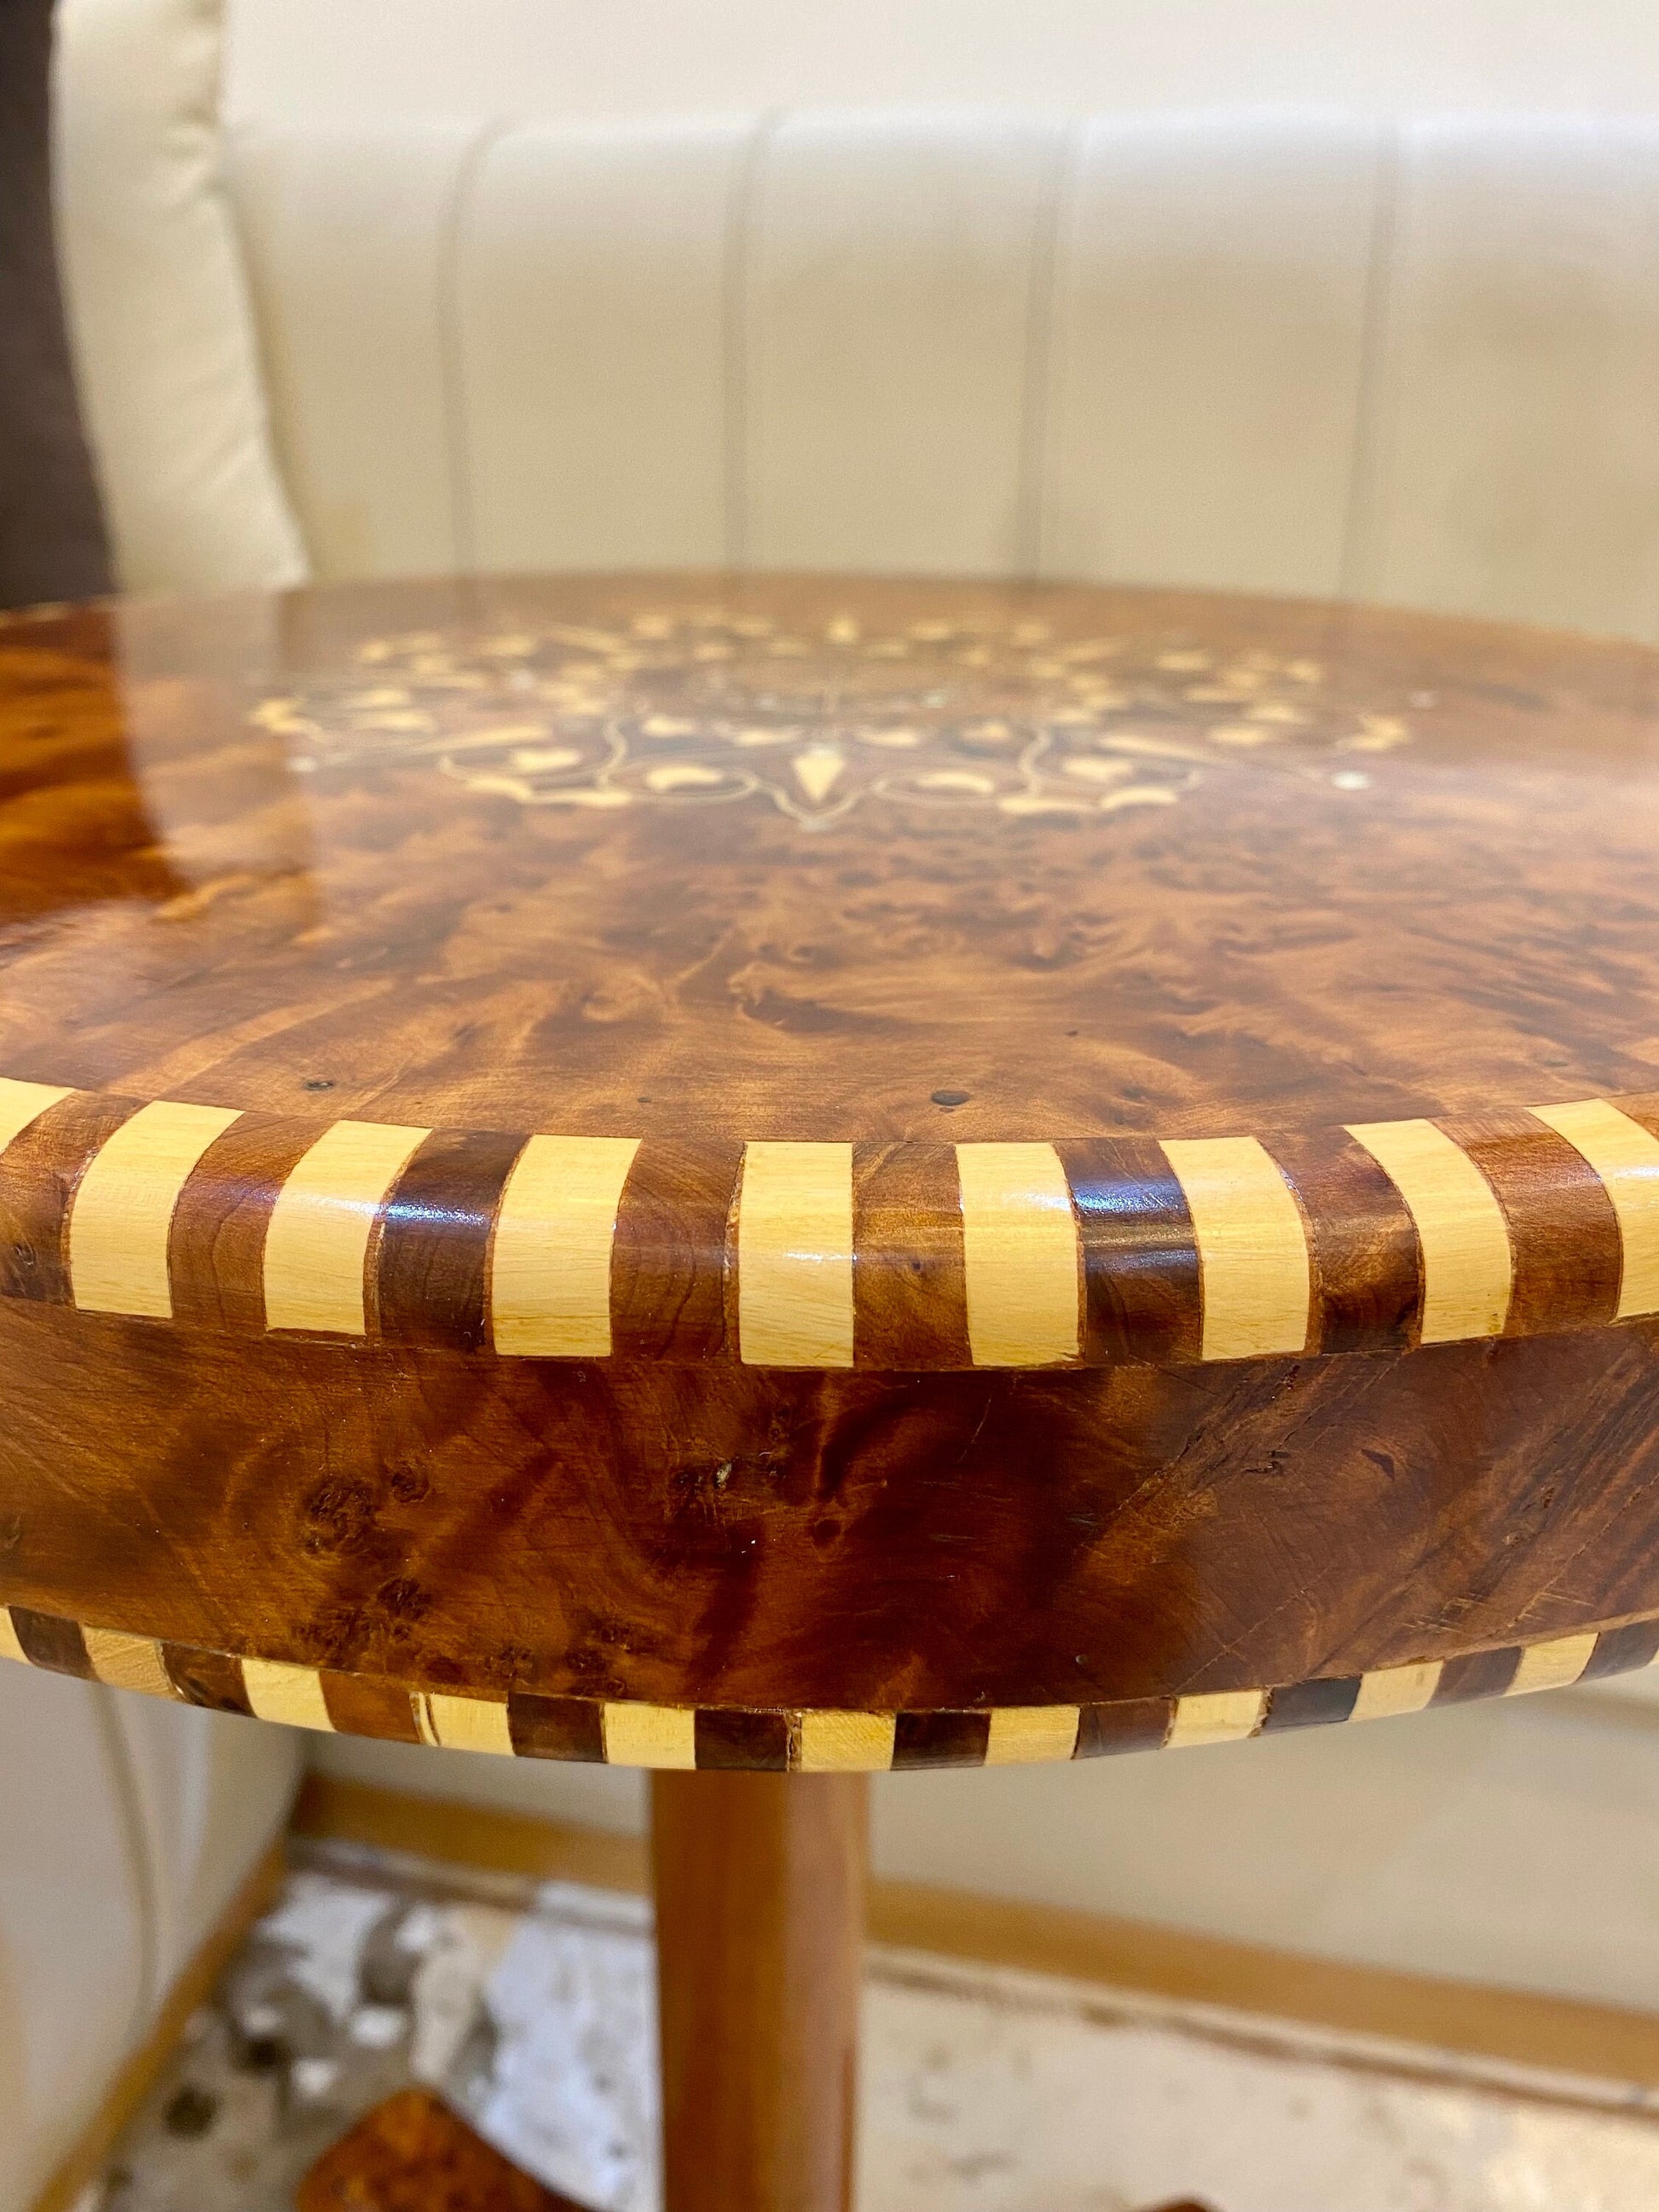 17"x17" Handmade Moroccan Mosaic Thuya Wood Table with Lemon,brass,mother of pearls Inlay,unique home decor living room,Berber Coffee table